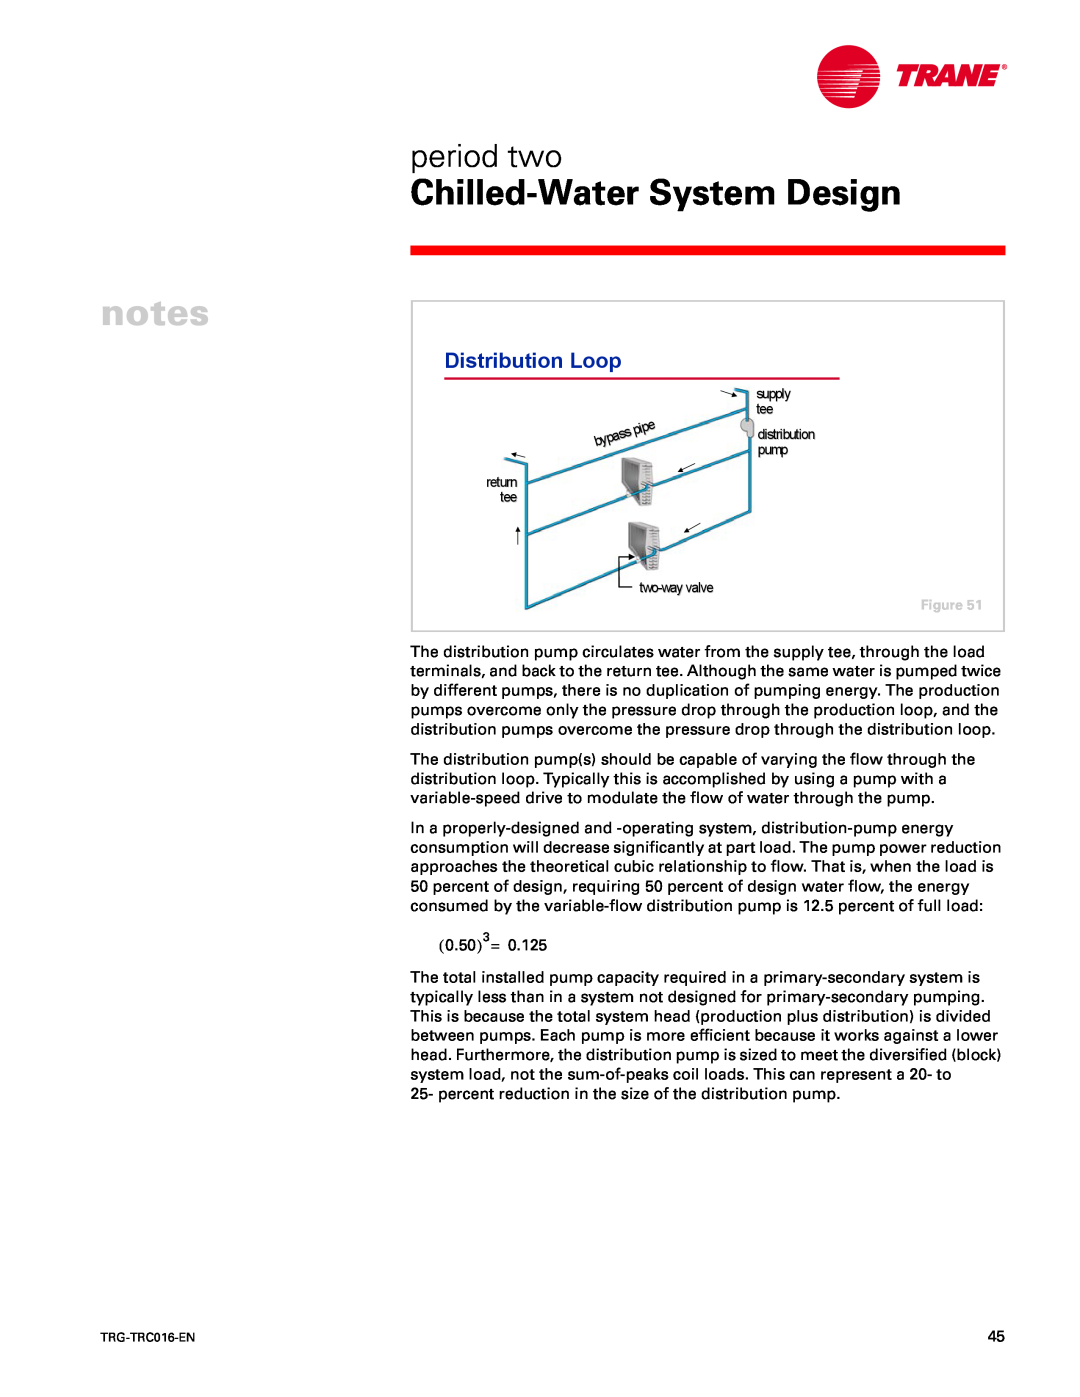 Trane TRG-TRC016-EN manual Distribution Loop, Chilled-WaterSystem Design, period two 